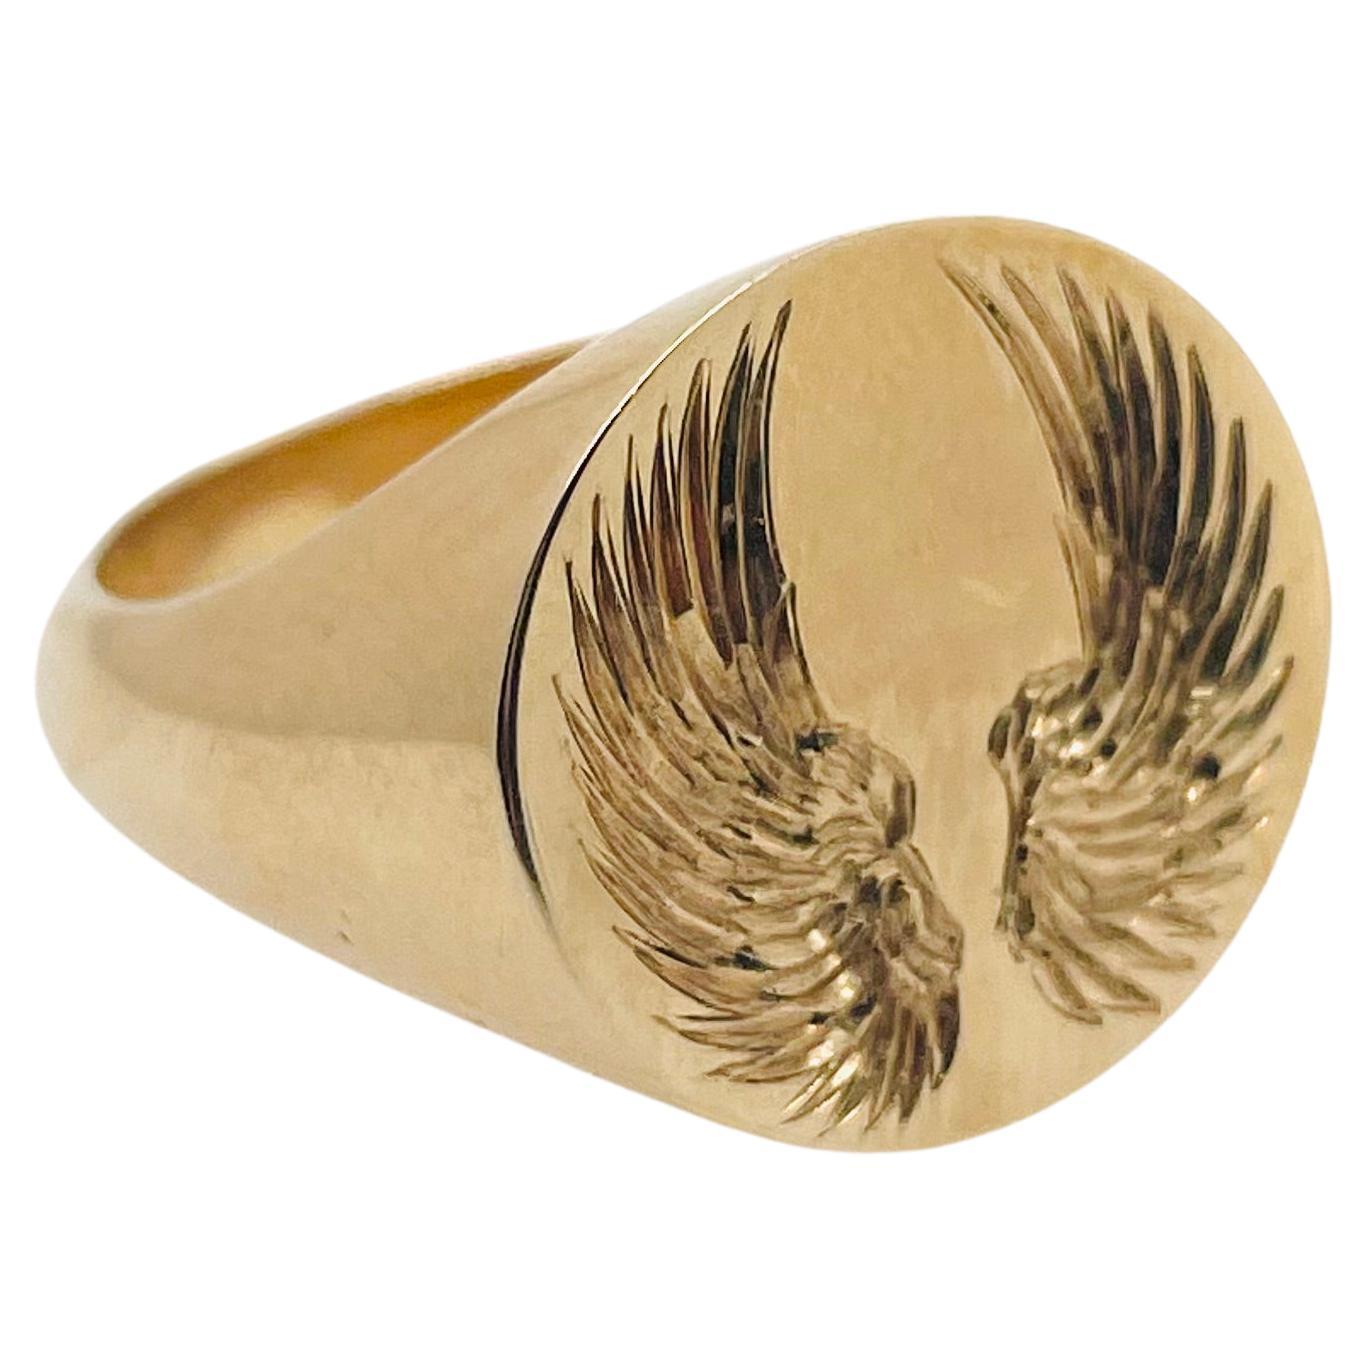 Solid signet ring , size Q (AUD/UK)

Hand engraved with angel wings

9ct yellow gold

Customisable - Please message our designer to start the process